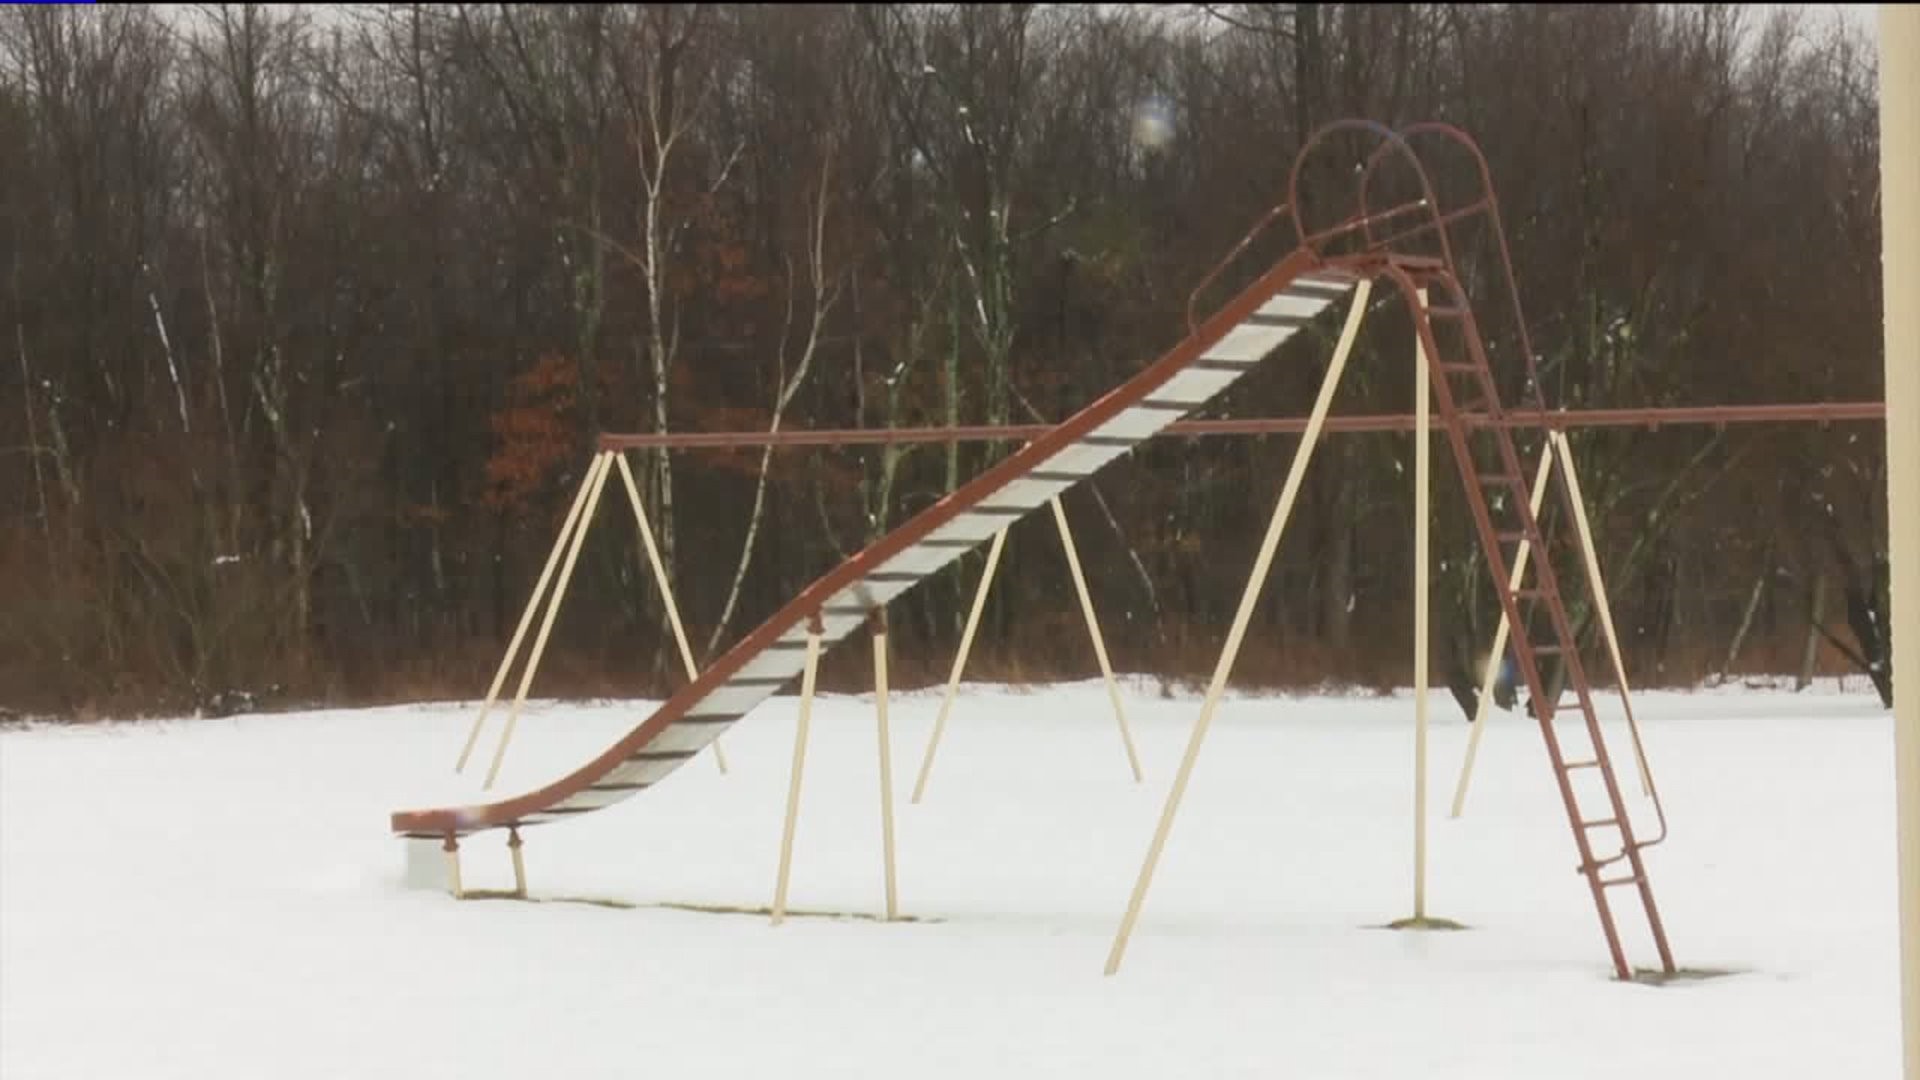 Dispute over Playground in Schuylkill County